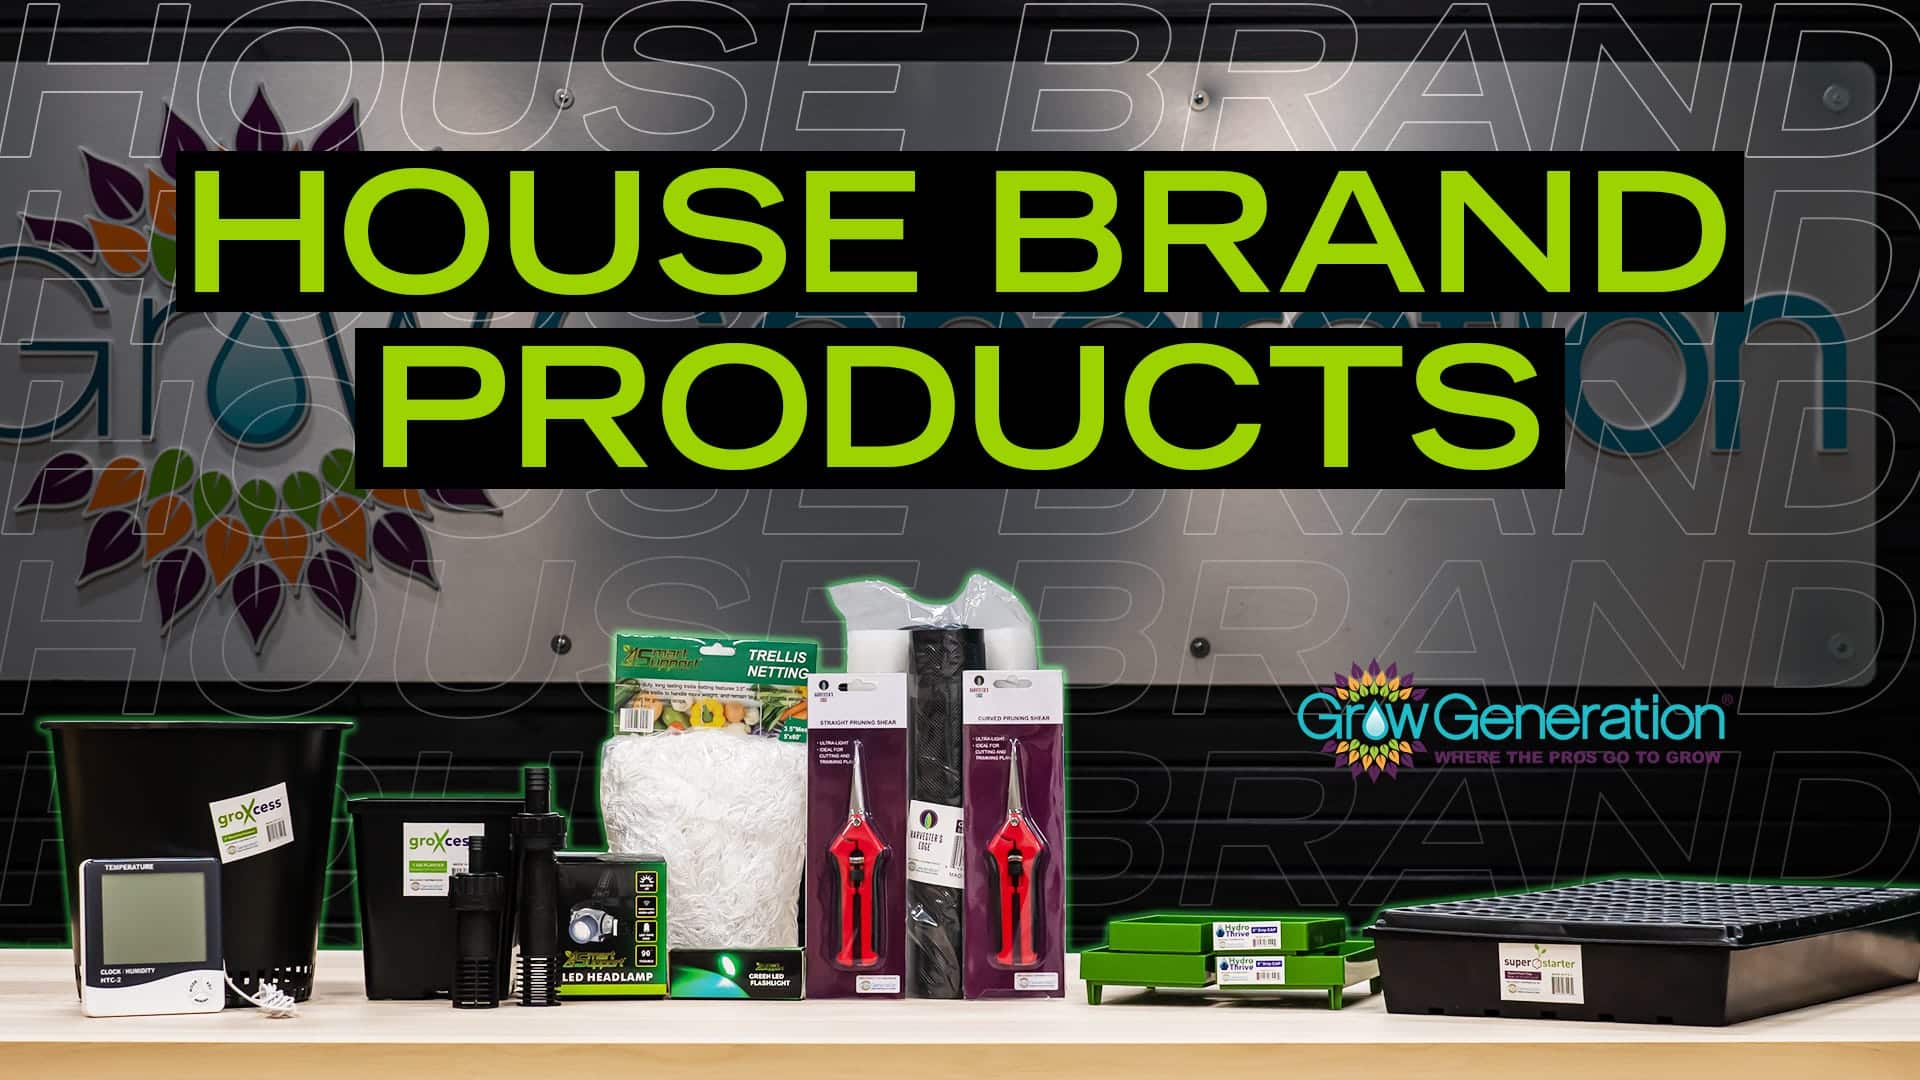 House brand products video cover